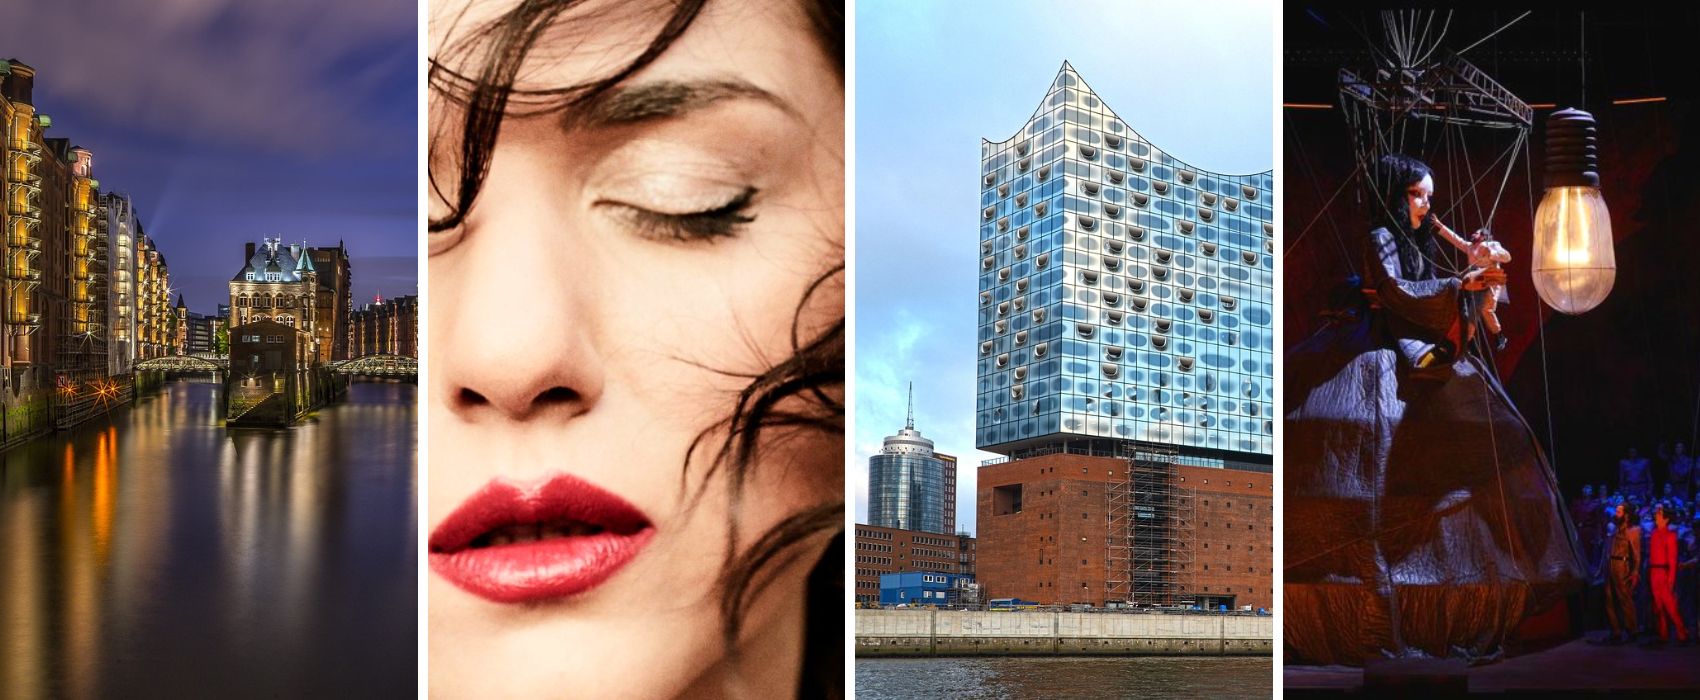  Hamburg from 5 to 8/5: Concert at the Elbphilharmonie and Norma at the Opera, Hamburg in style! (Copie)